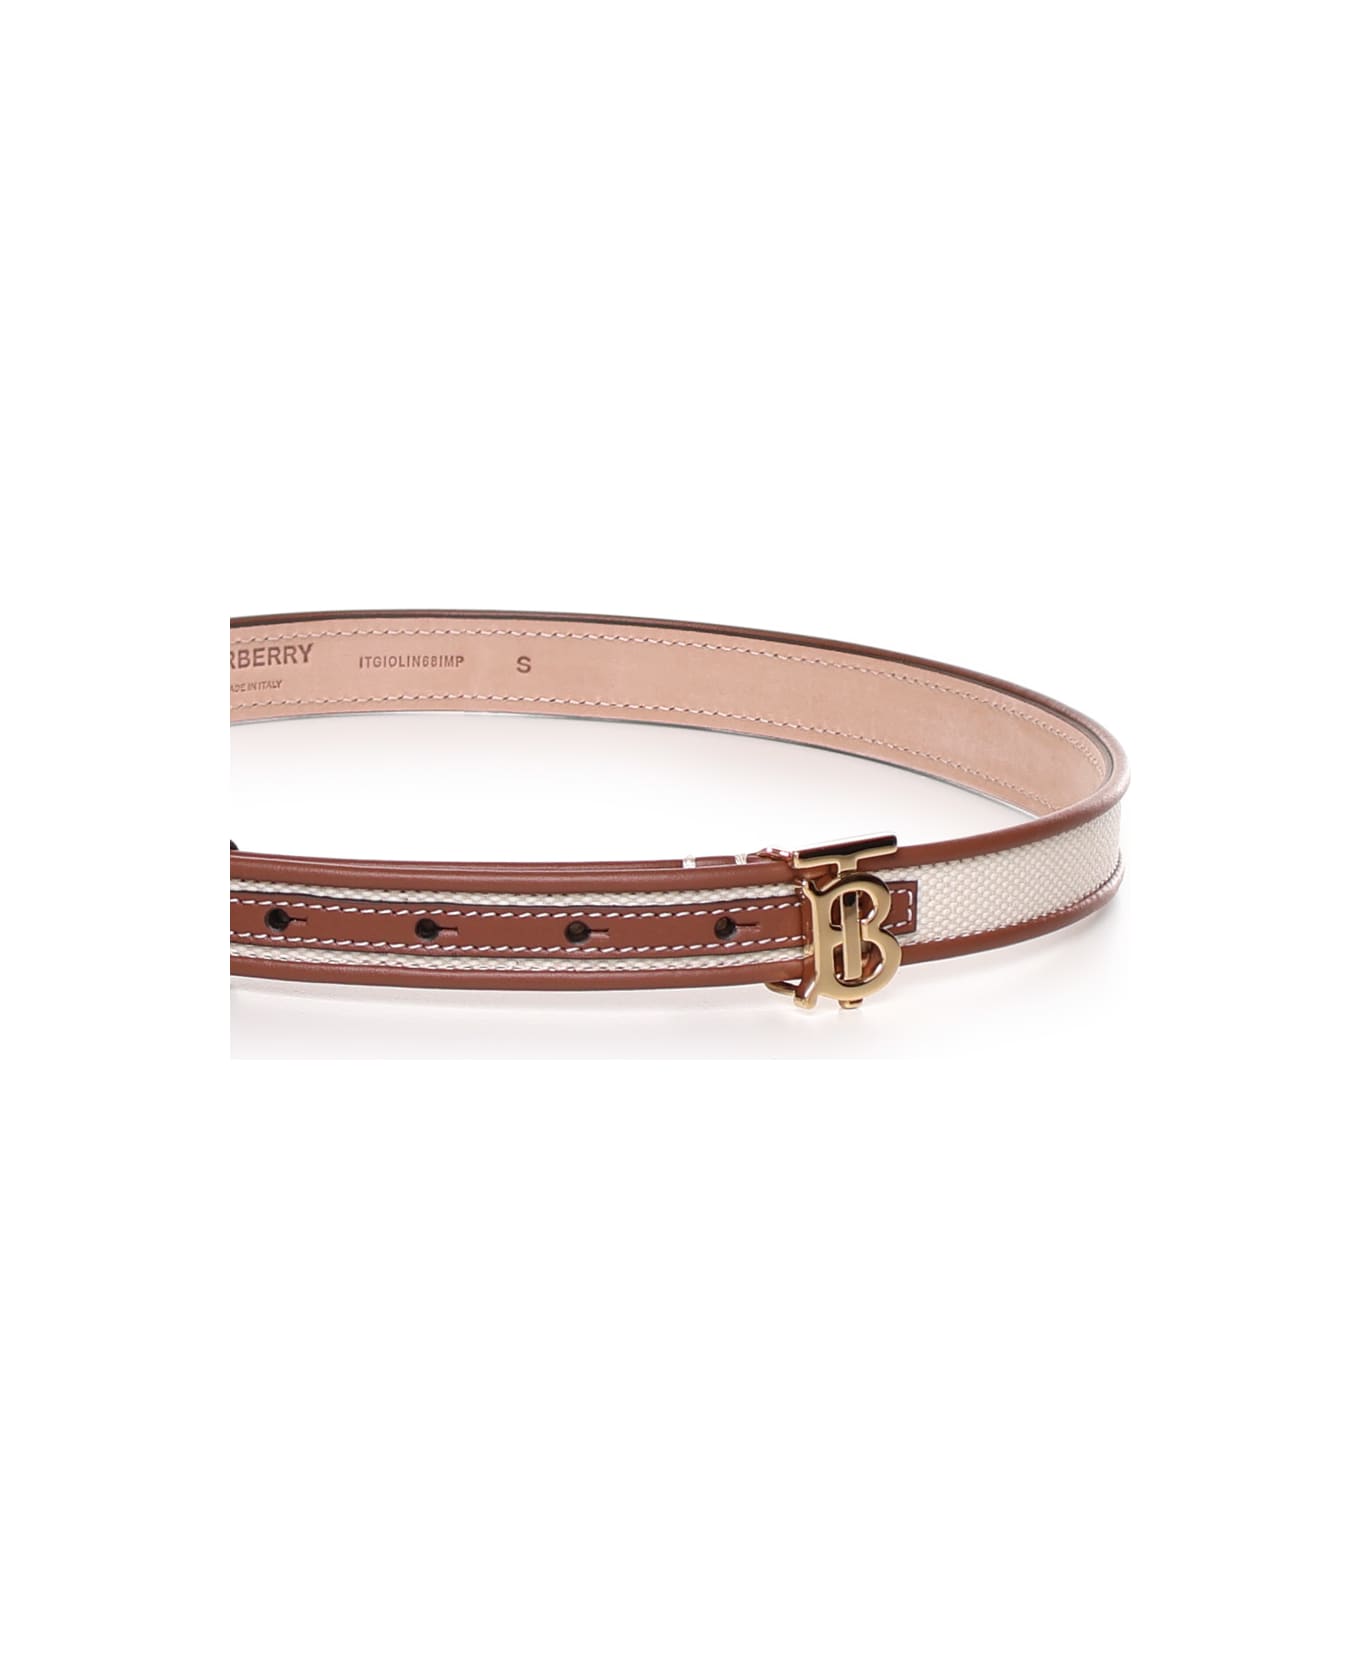 Burberry Tb Belt In Canvas And Leather - A1395